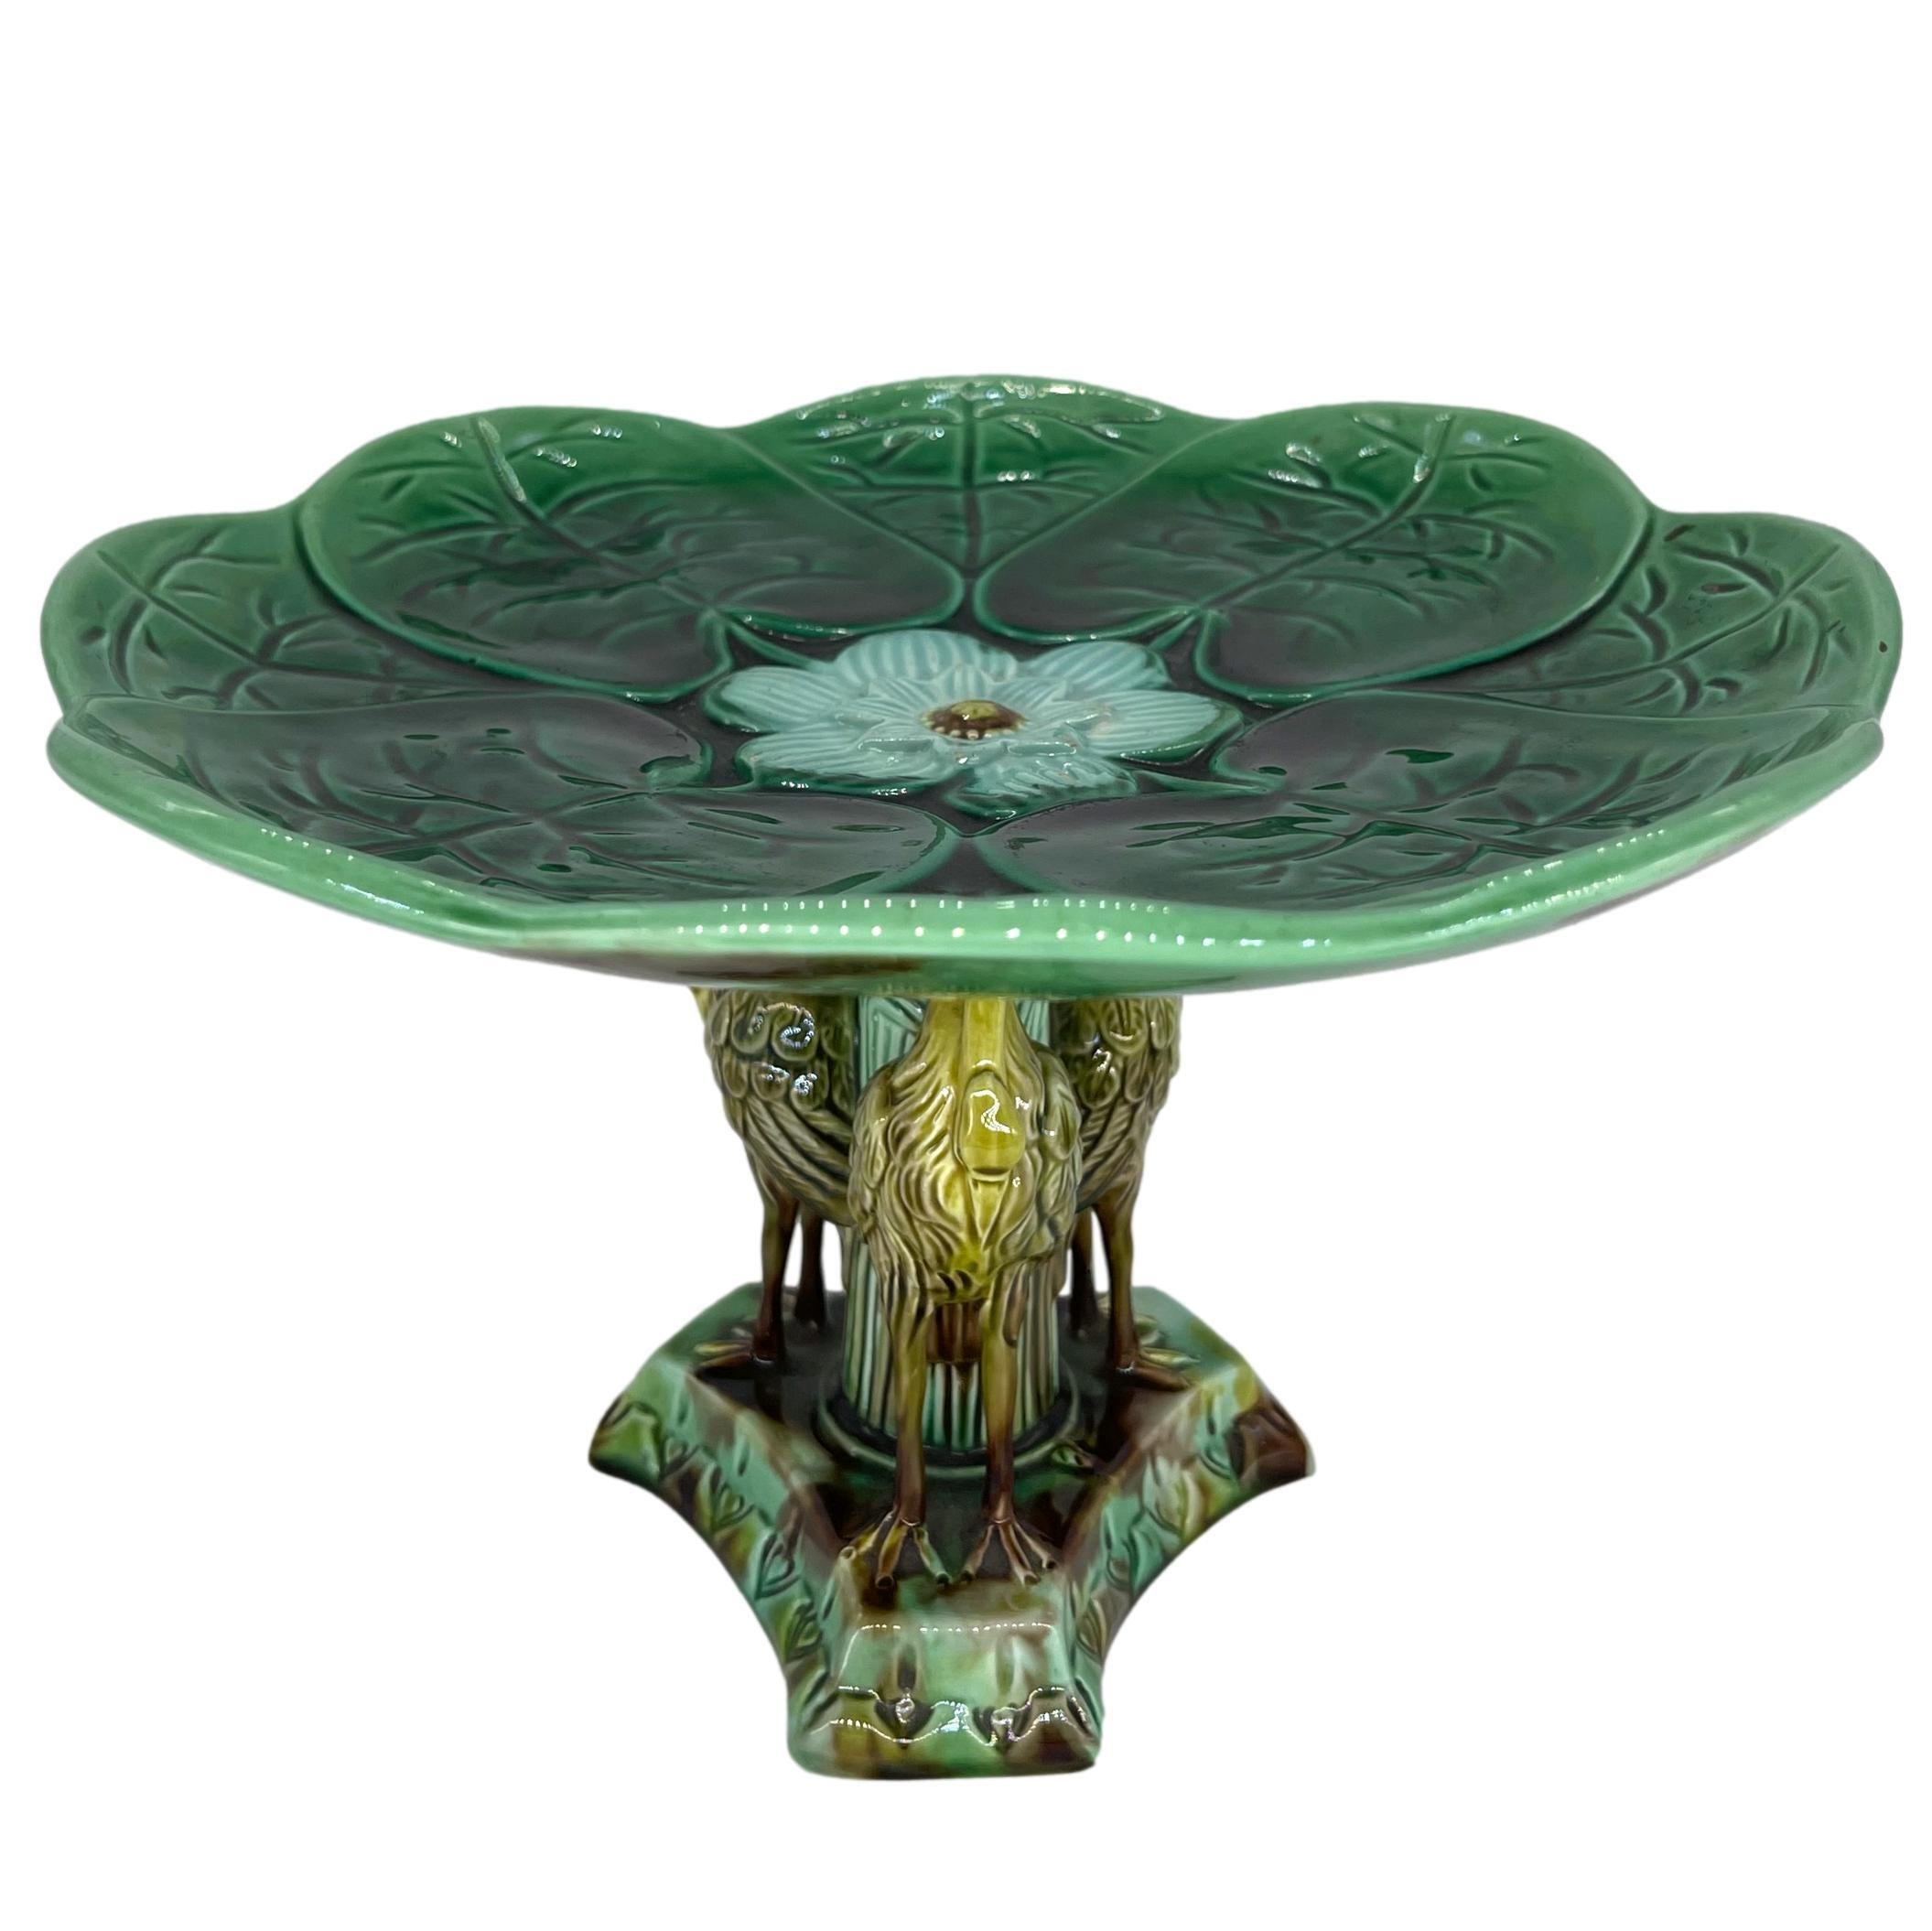 Victorian Adams & Bromley Majolica Lily Pad Comport with Three Herons Pedestal, ca. 1880